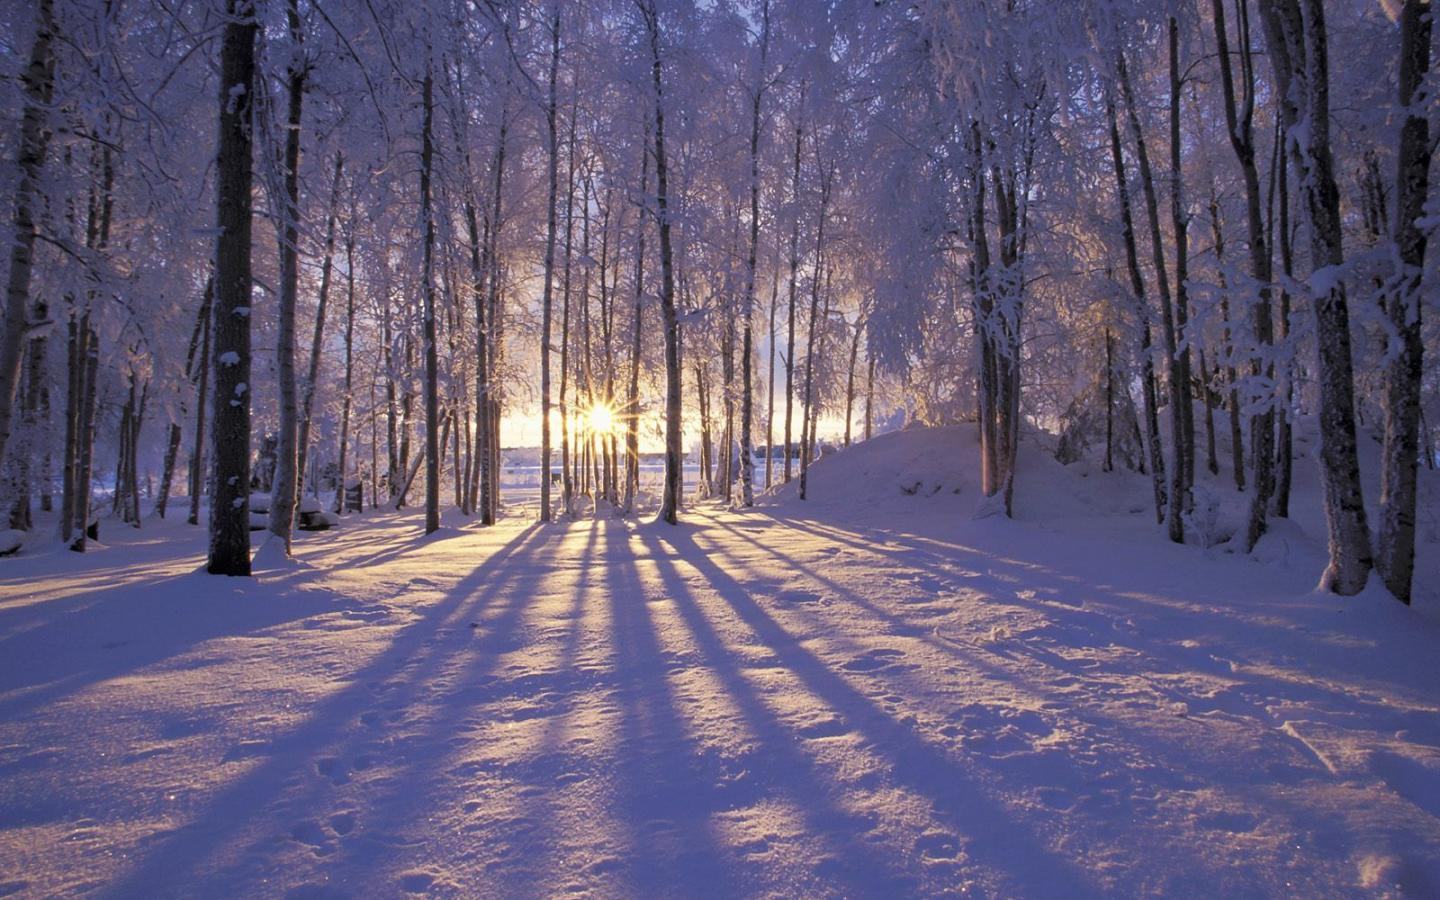 Winter Wallpapers Backgrounds - Download free winter natures wint